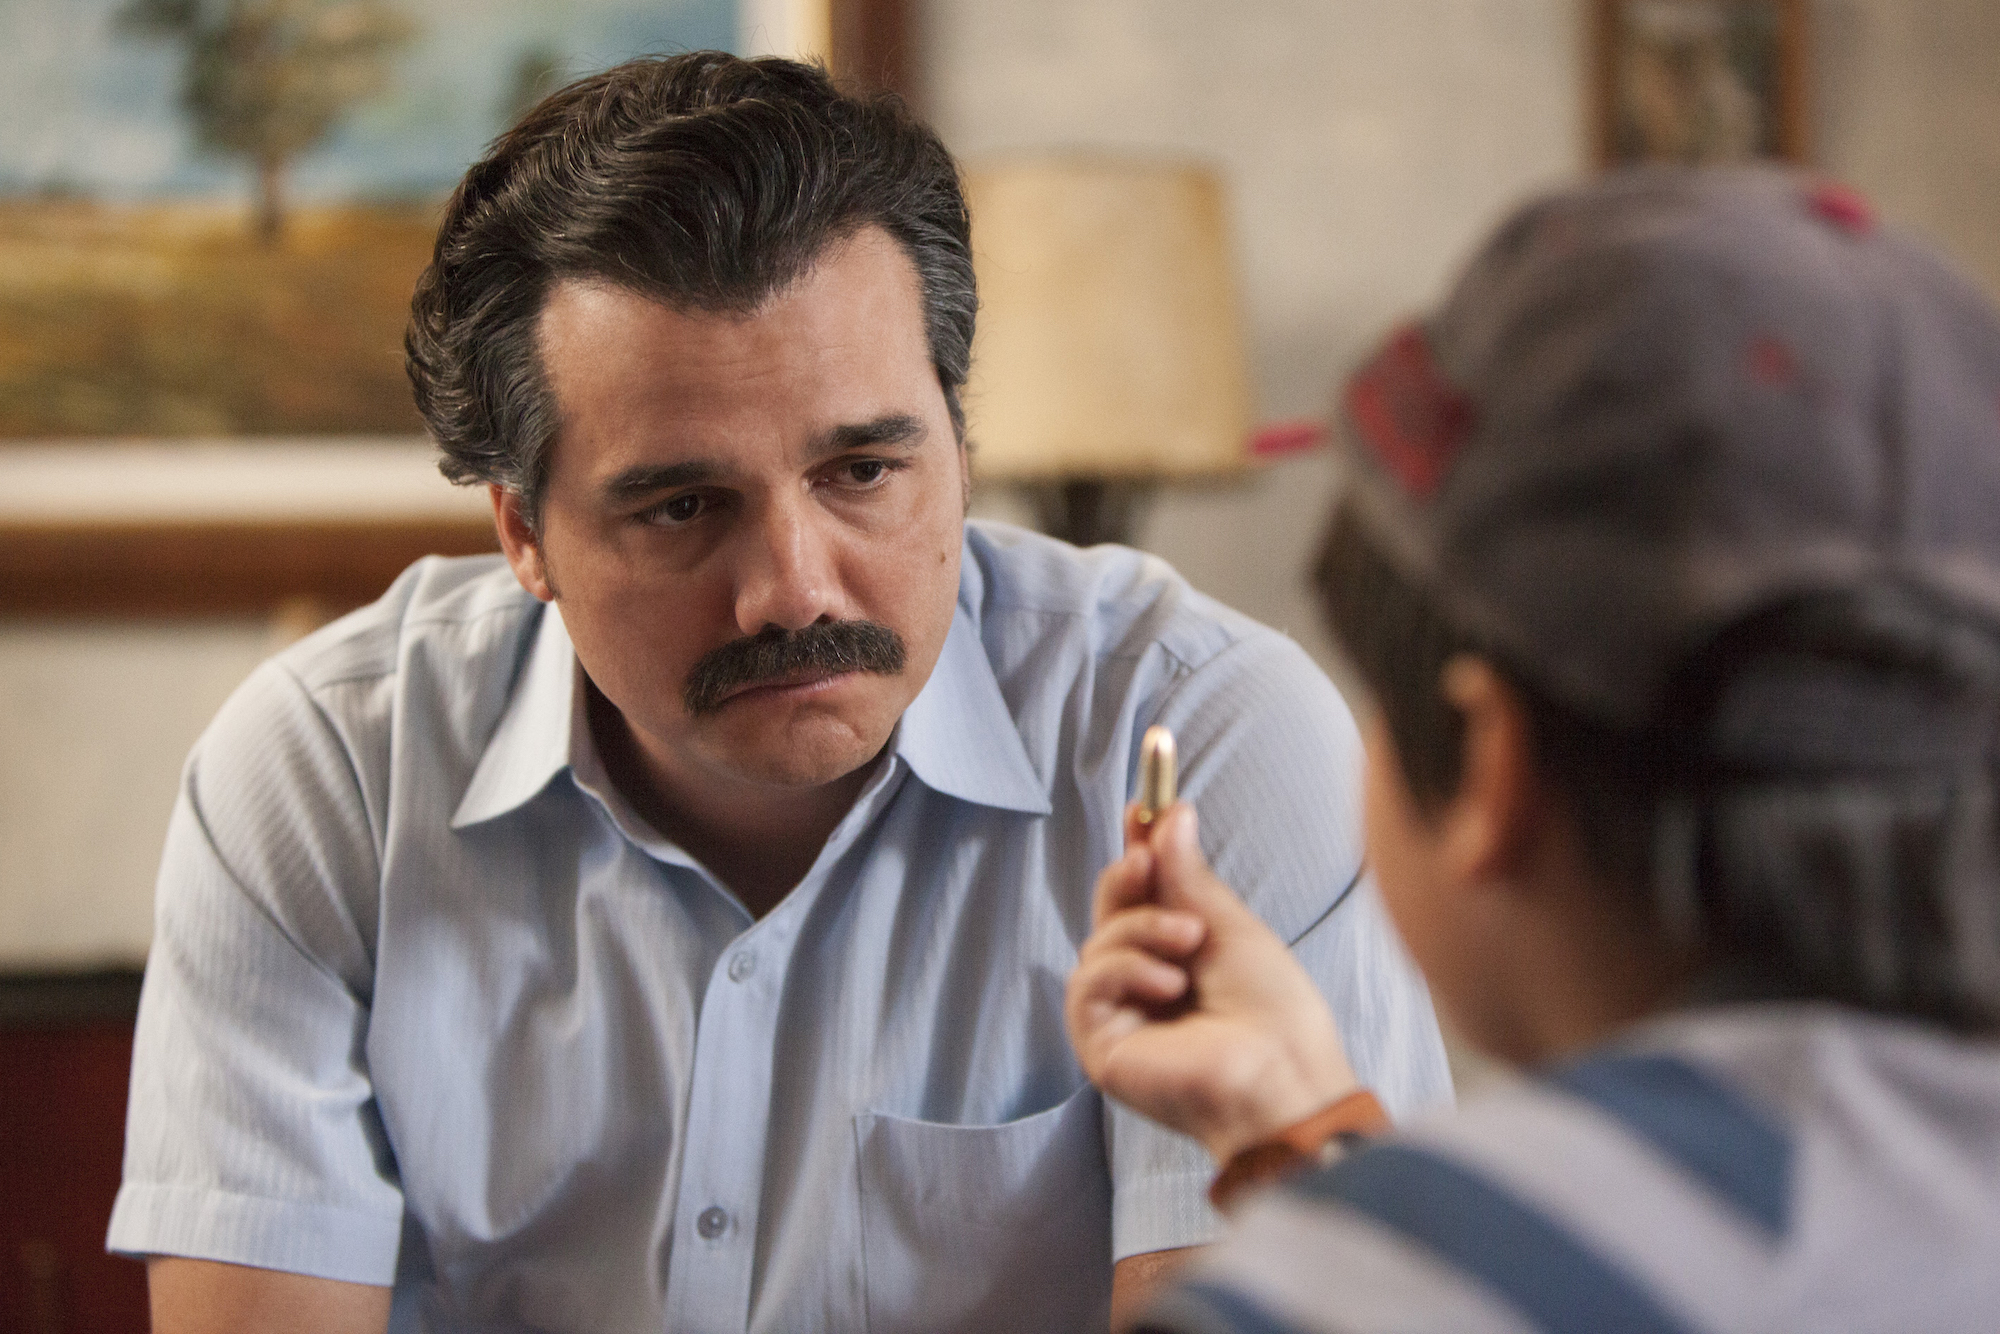 Wagner Moura wearing a blue shirt with white strips in Netflix's 'Narcos.'